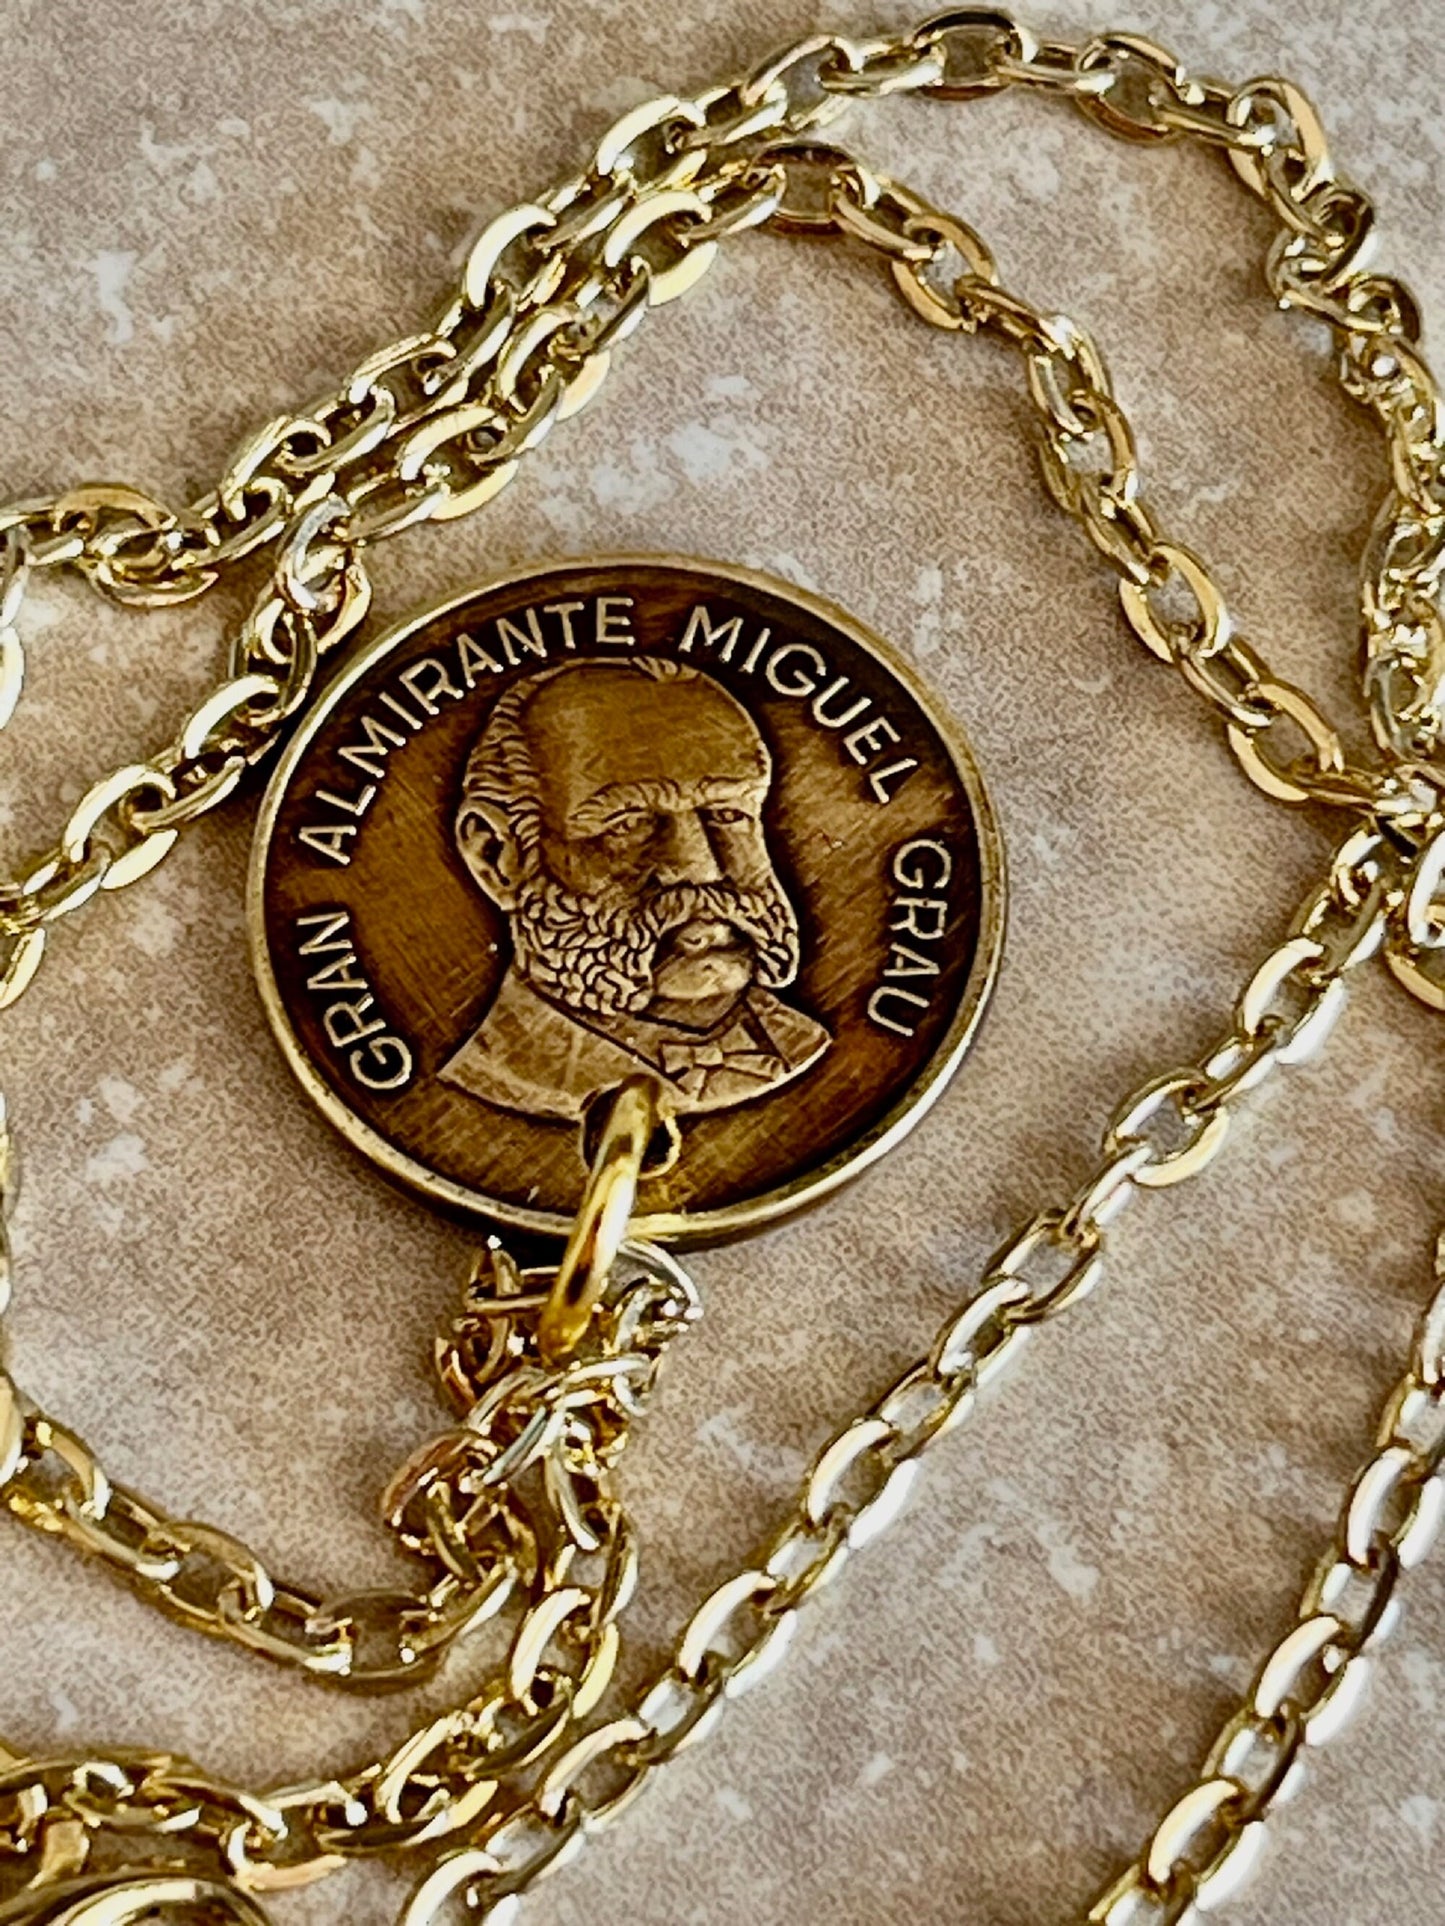 Peru Coin Pendant Peruvian 20 Centimos Personal Necklace Old Vintage Handmade Jewelry Gift Friend Charm For Him Her World Coin Collector